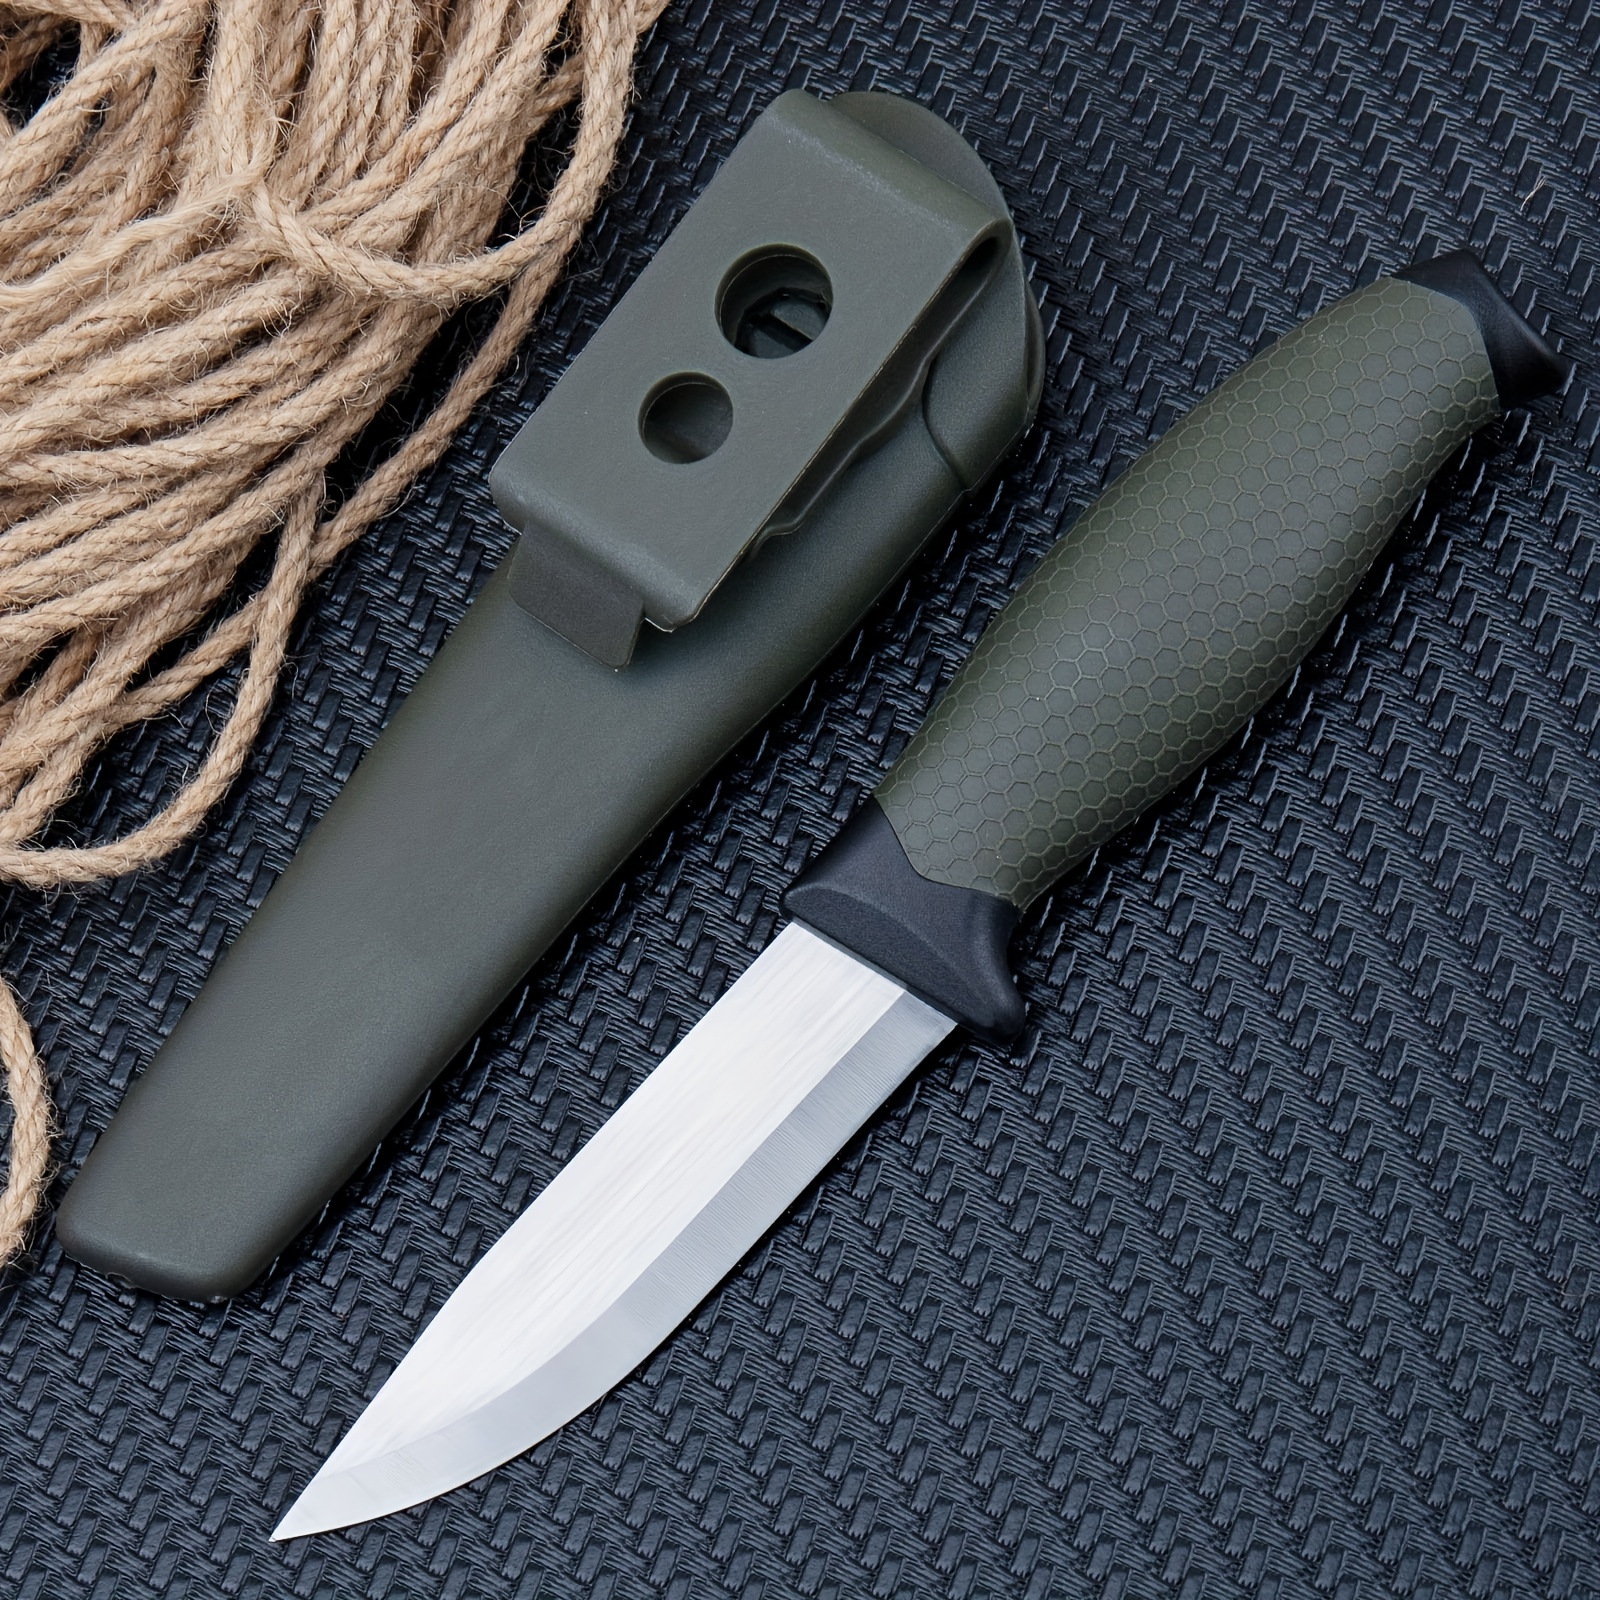  Morakniv Companion Carbon Steel Fixed-Blade Knife with Sheath,  4.1 Inch, Military Green : Sports & Outdoors